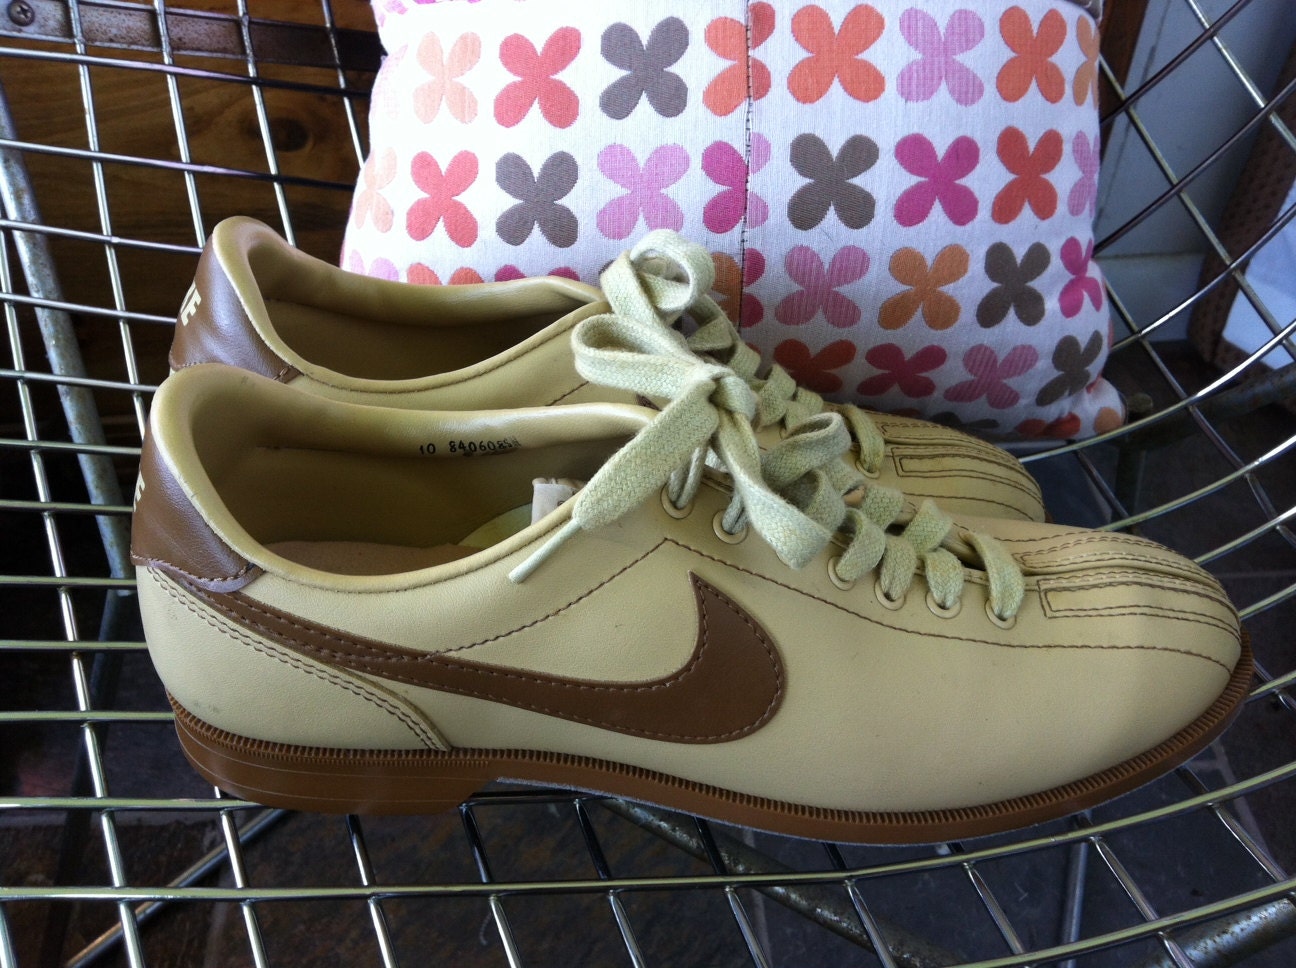 Vintage Nike Bowling Shoes 1984 US Men's size 10 by jamric